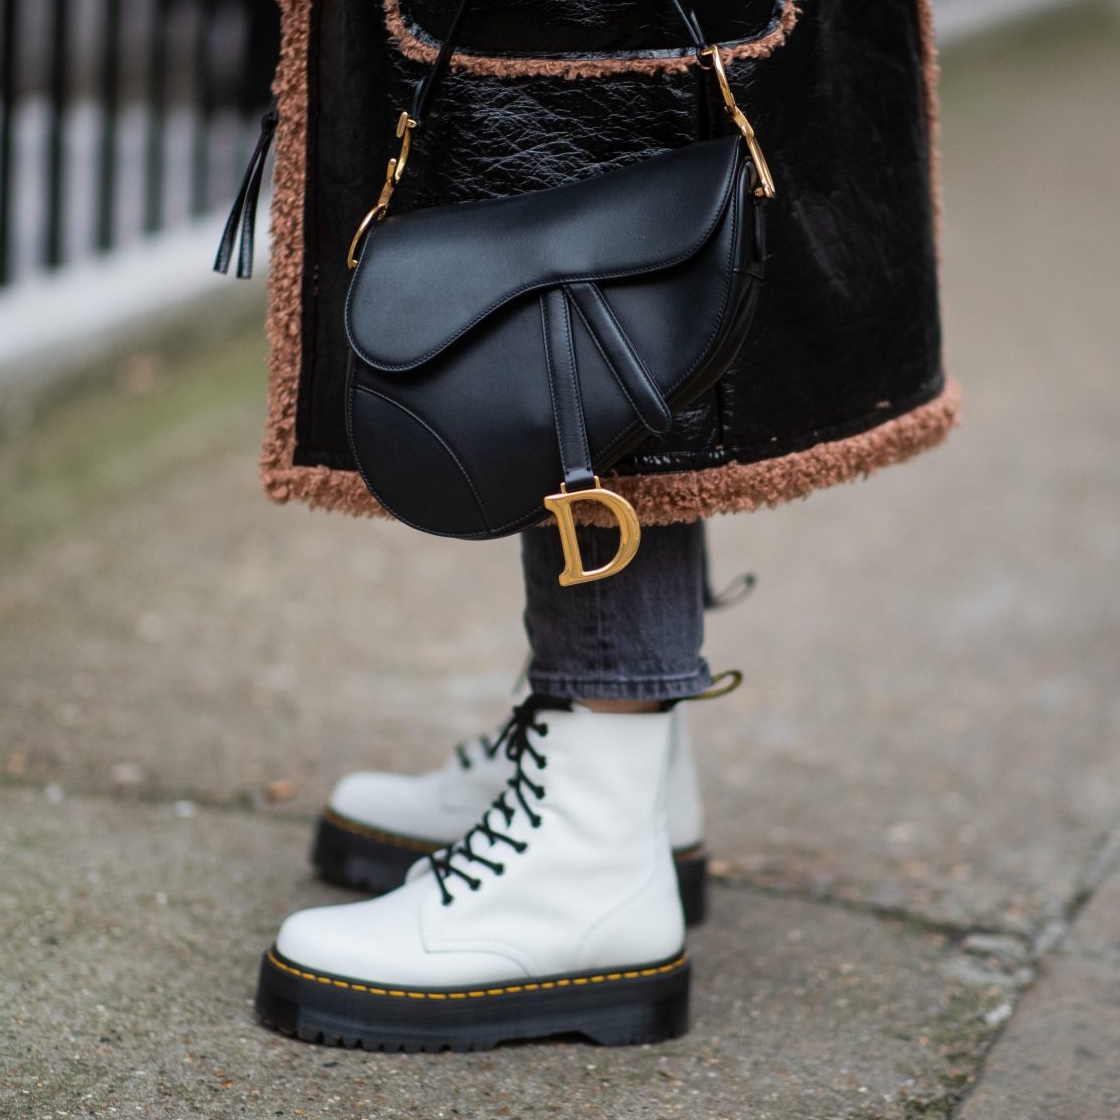 dr martens as winter boots